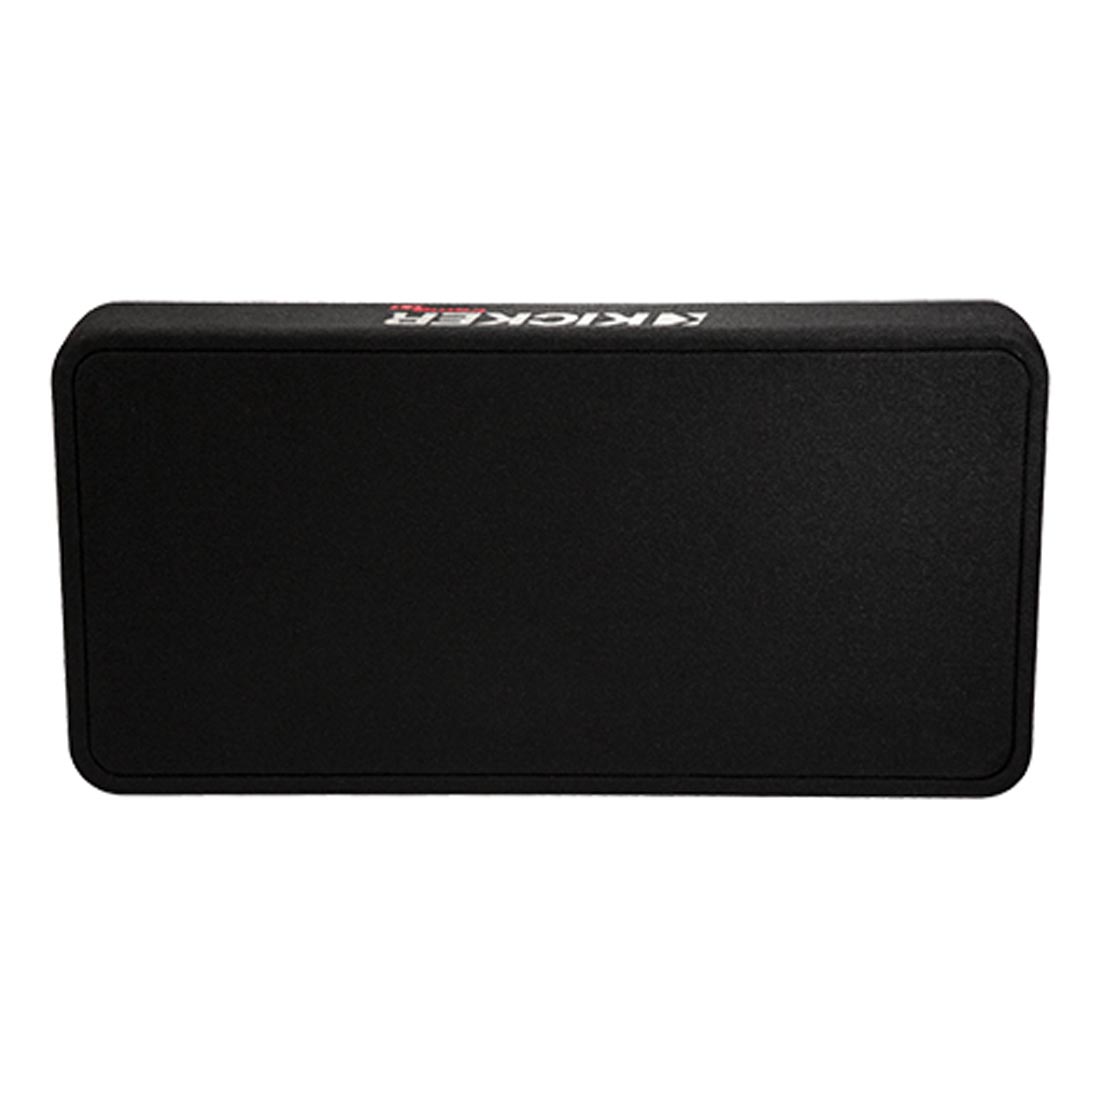 Kicker 48TCWRT122 Truck-Style 2-Ohm Sealed Enclosure with Single 12" CompRT Subwoofer and Passive Radiator